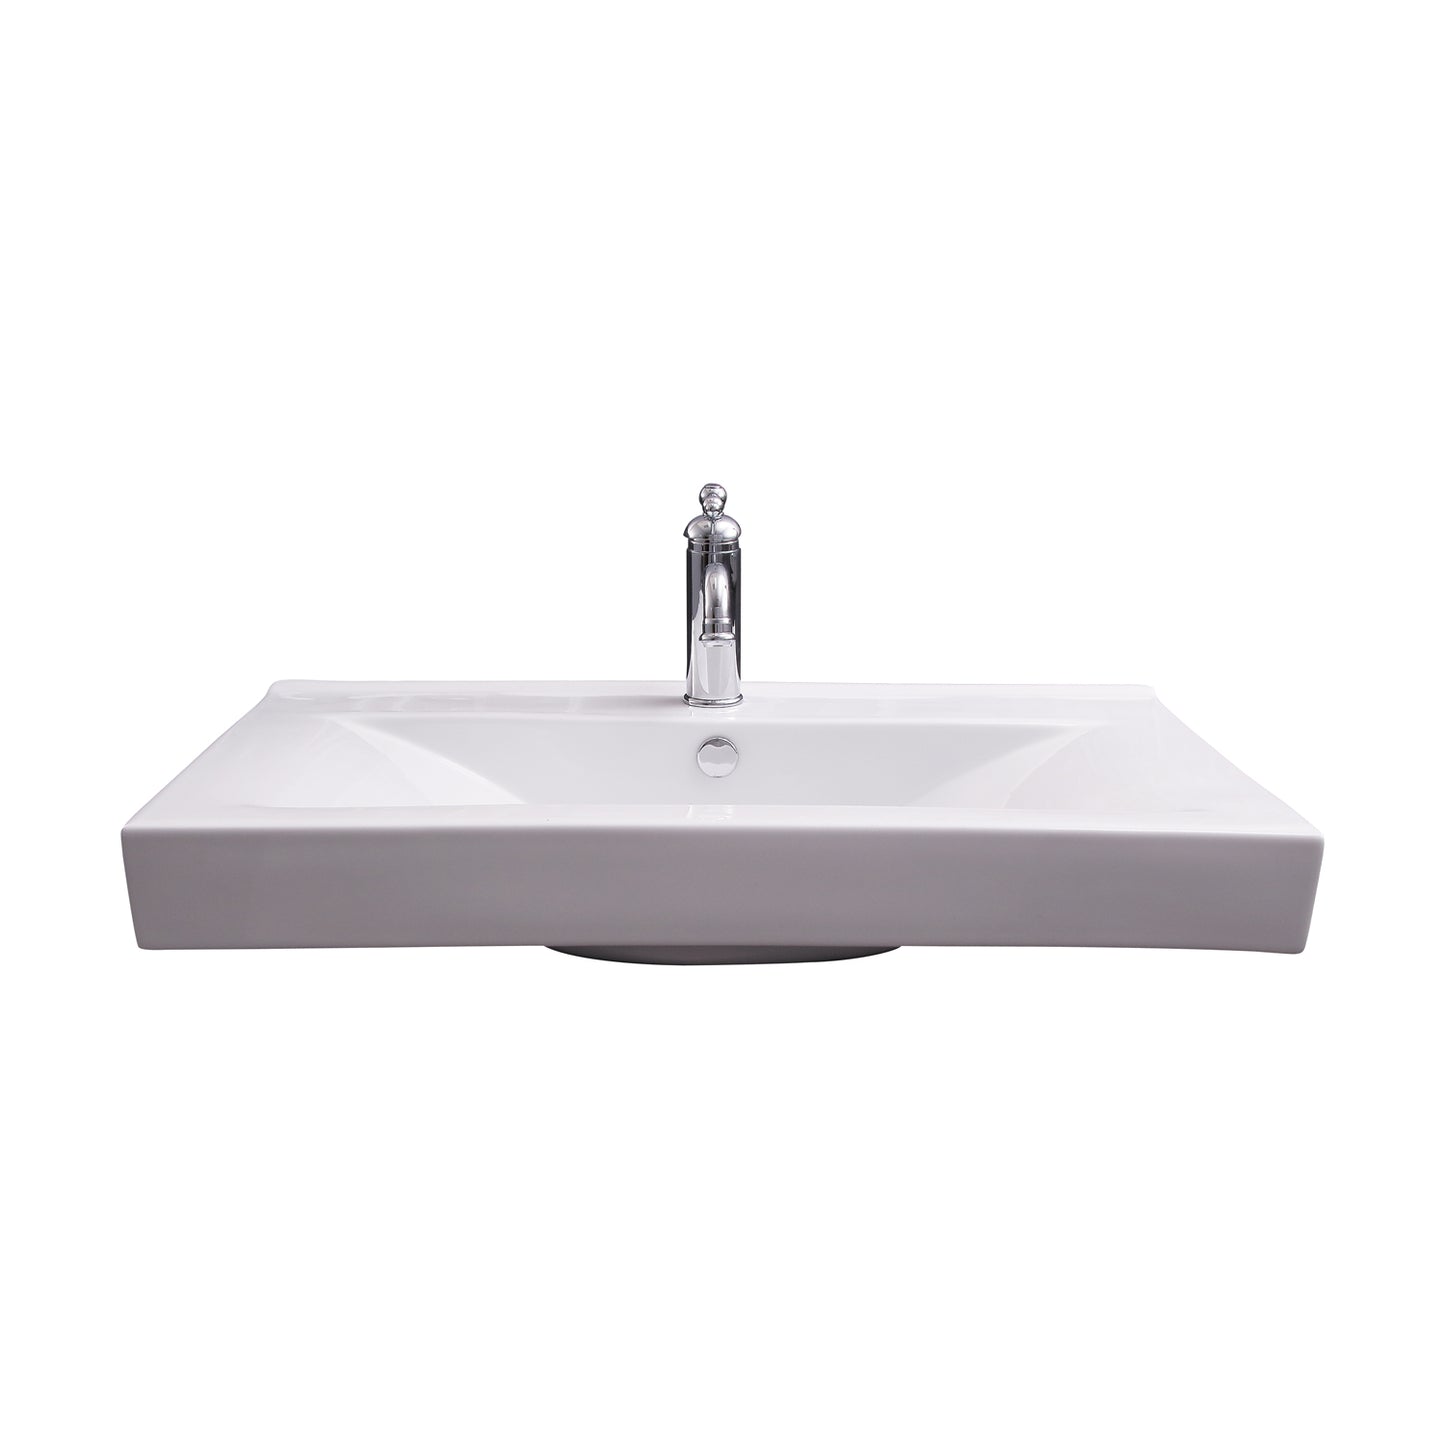 Twain Rectangular 32" Wall Hung Sink White with 1 Faucet Hole